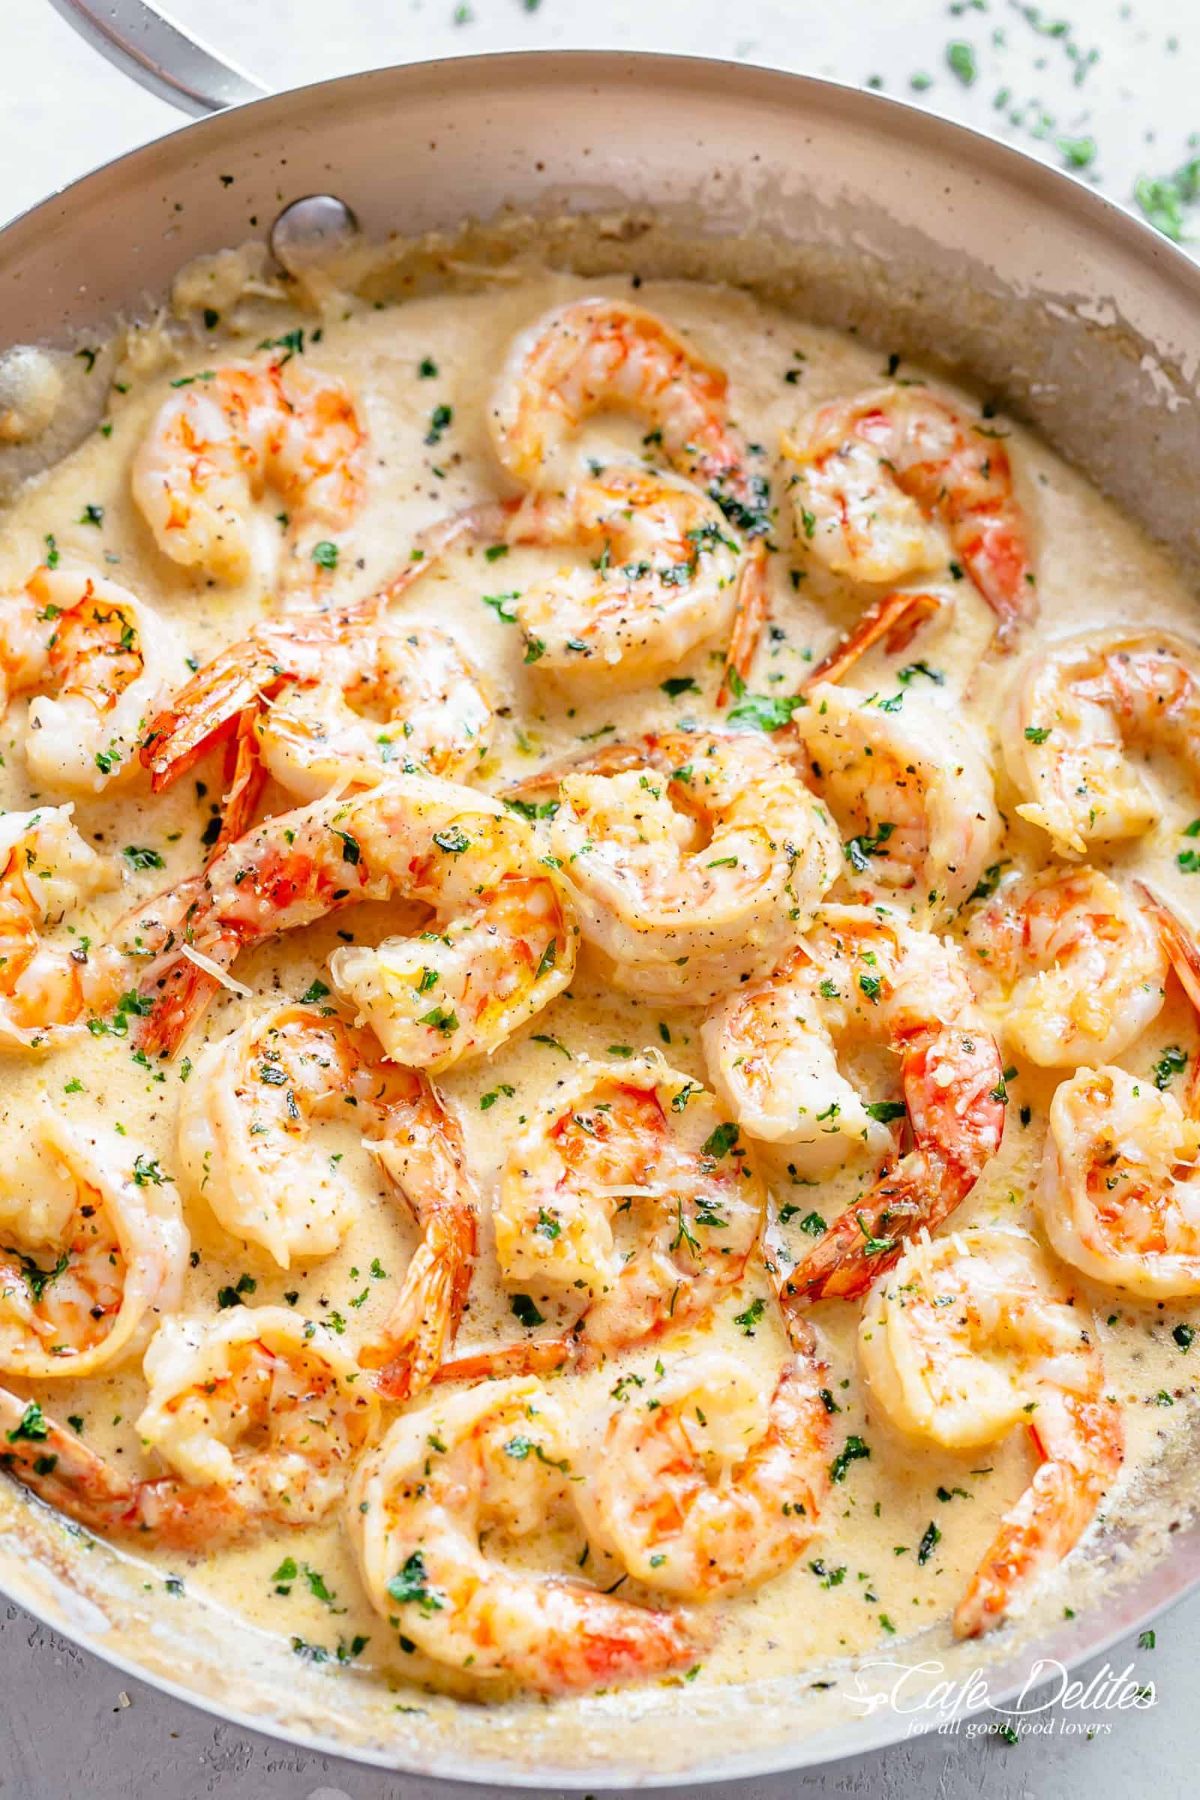 om a white surface is a skillet fill of prawns in a creamy sauce, sprinkled with green herbs